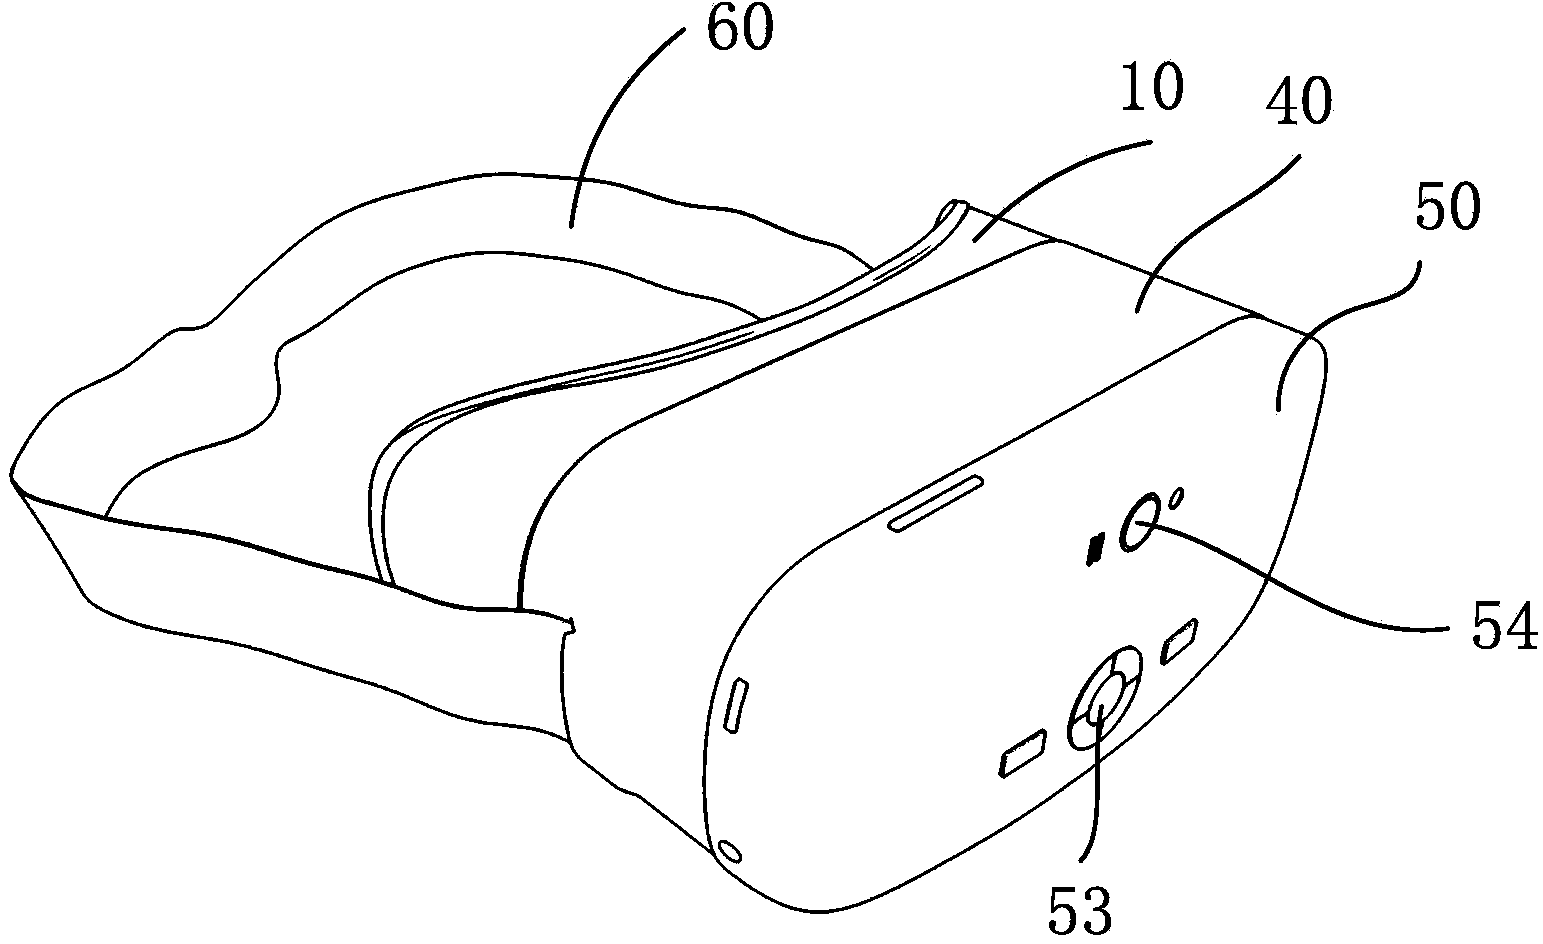 Head mounted lens amplifying electronic display device